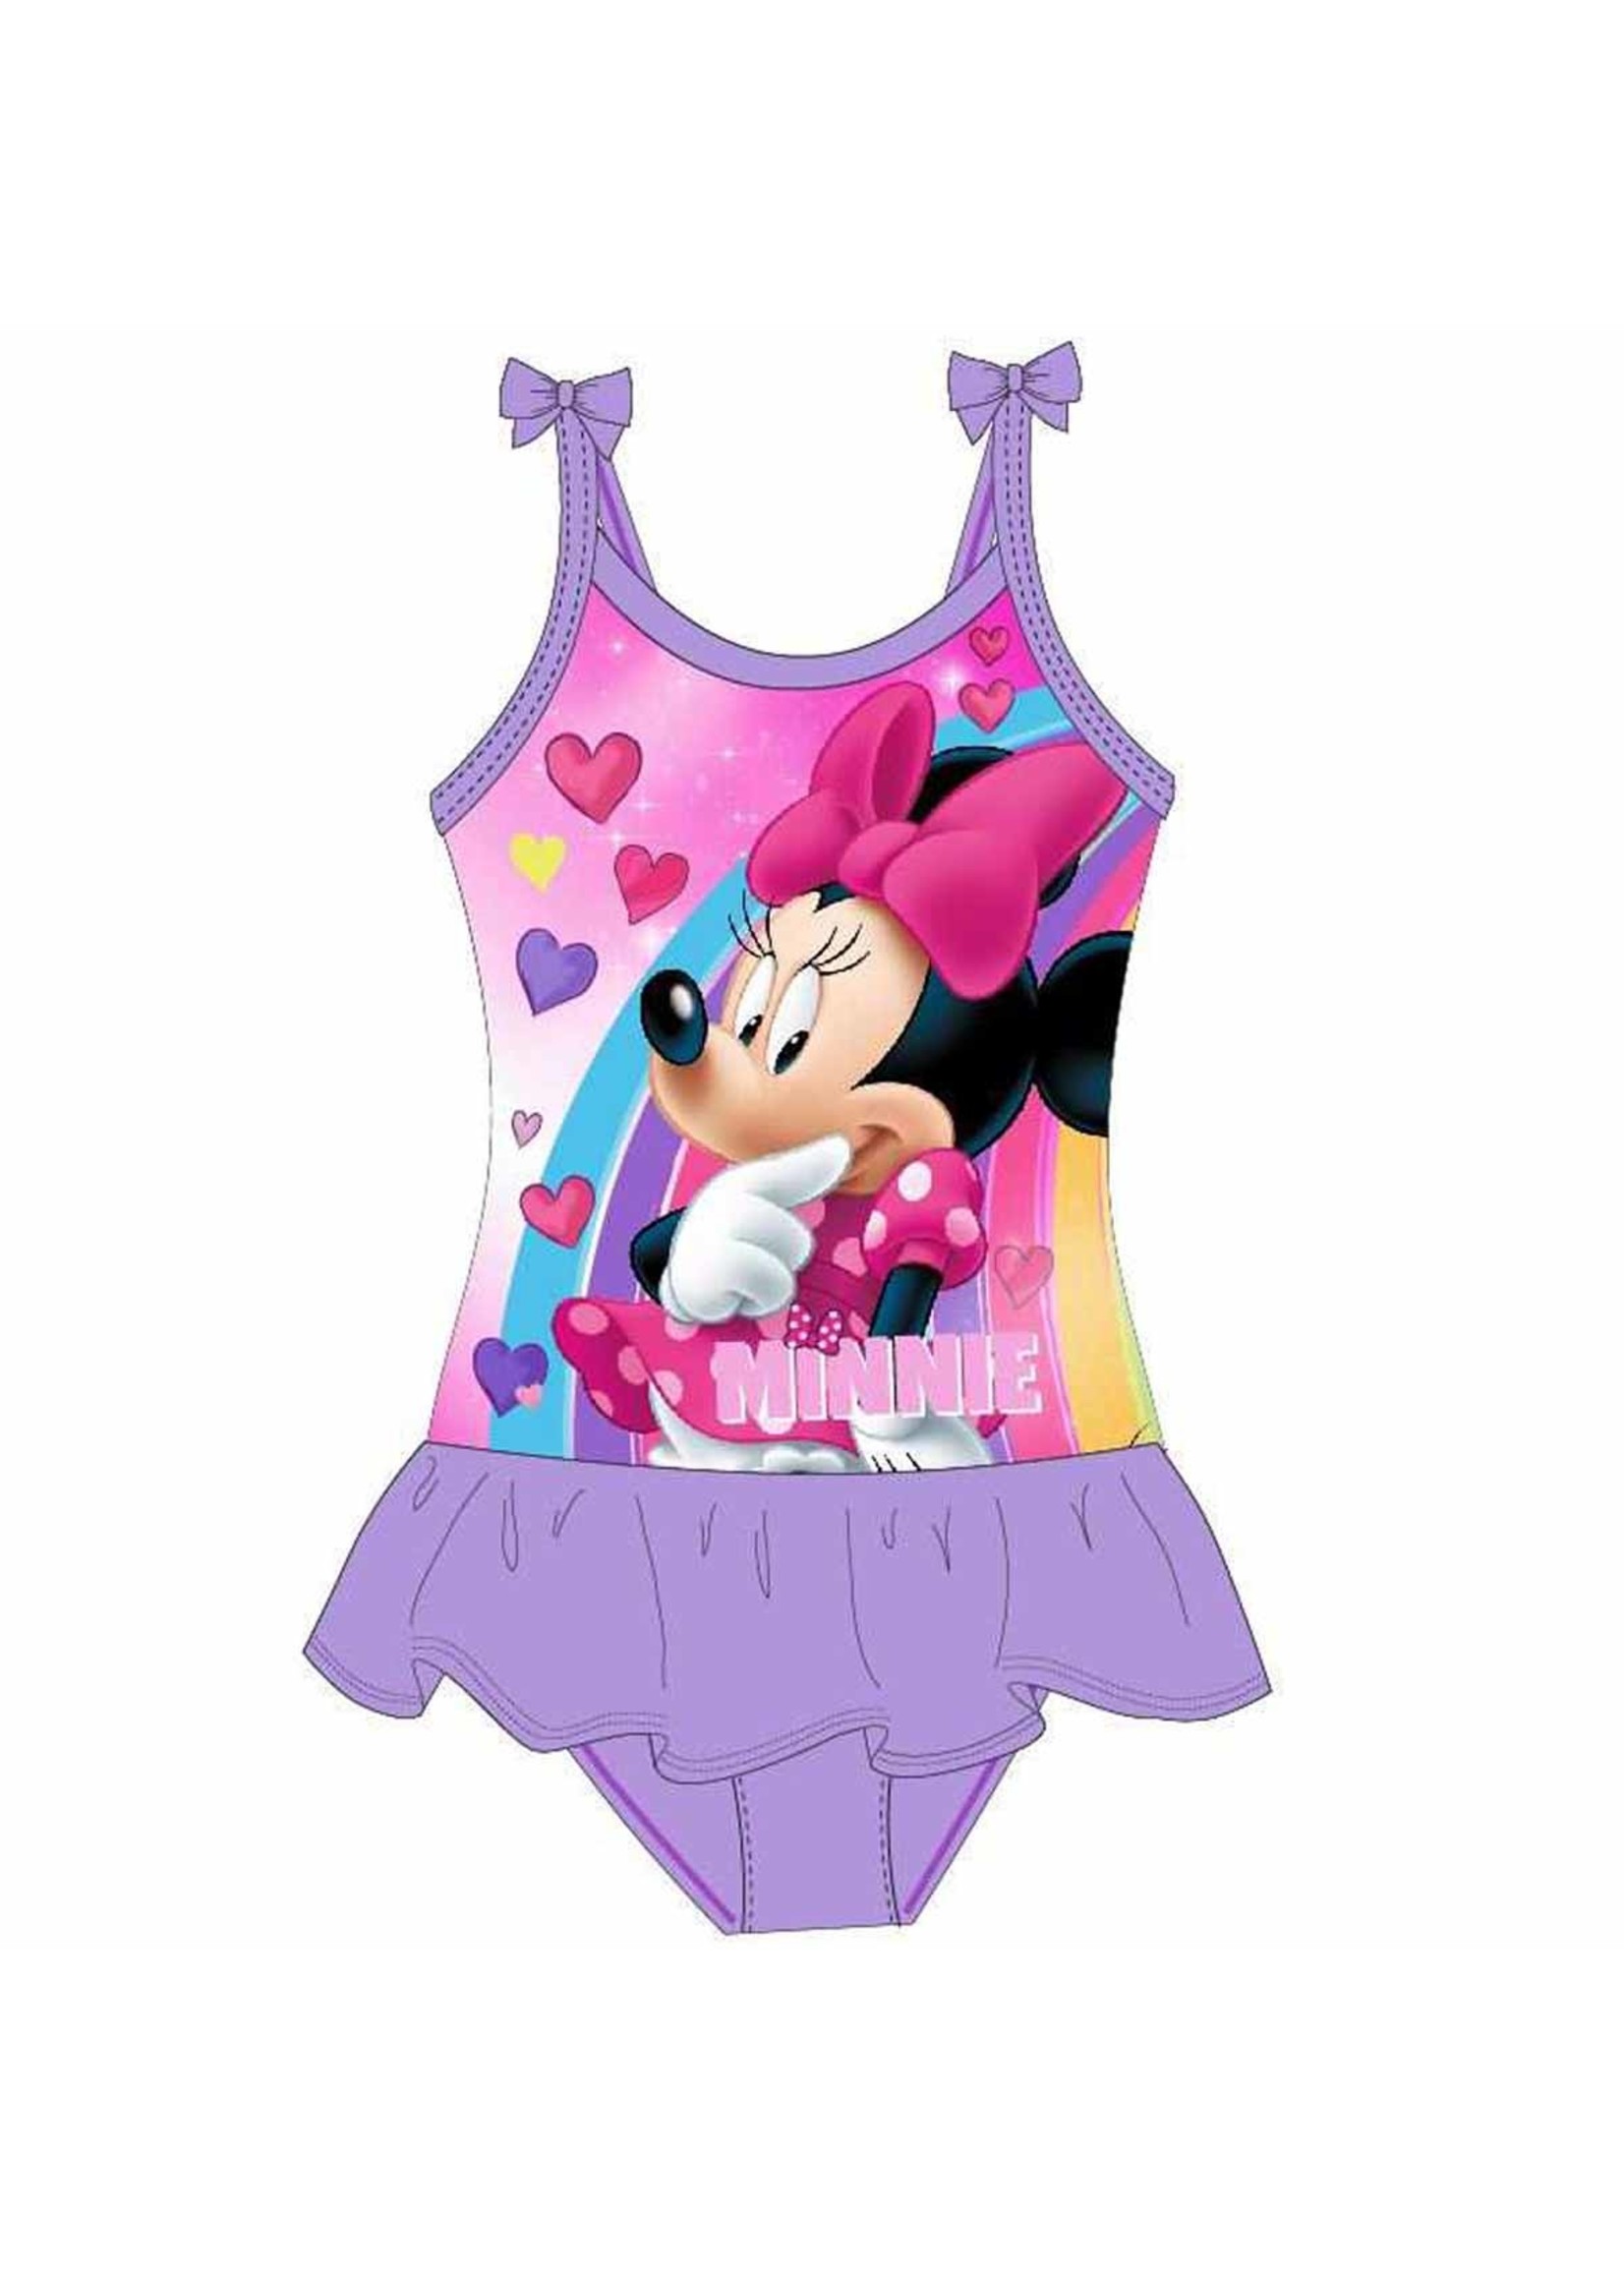 Disney Minnie Mouse swimsuit from Disney lilac